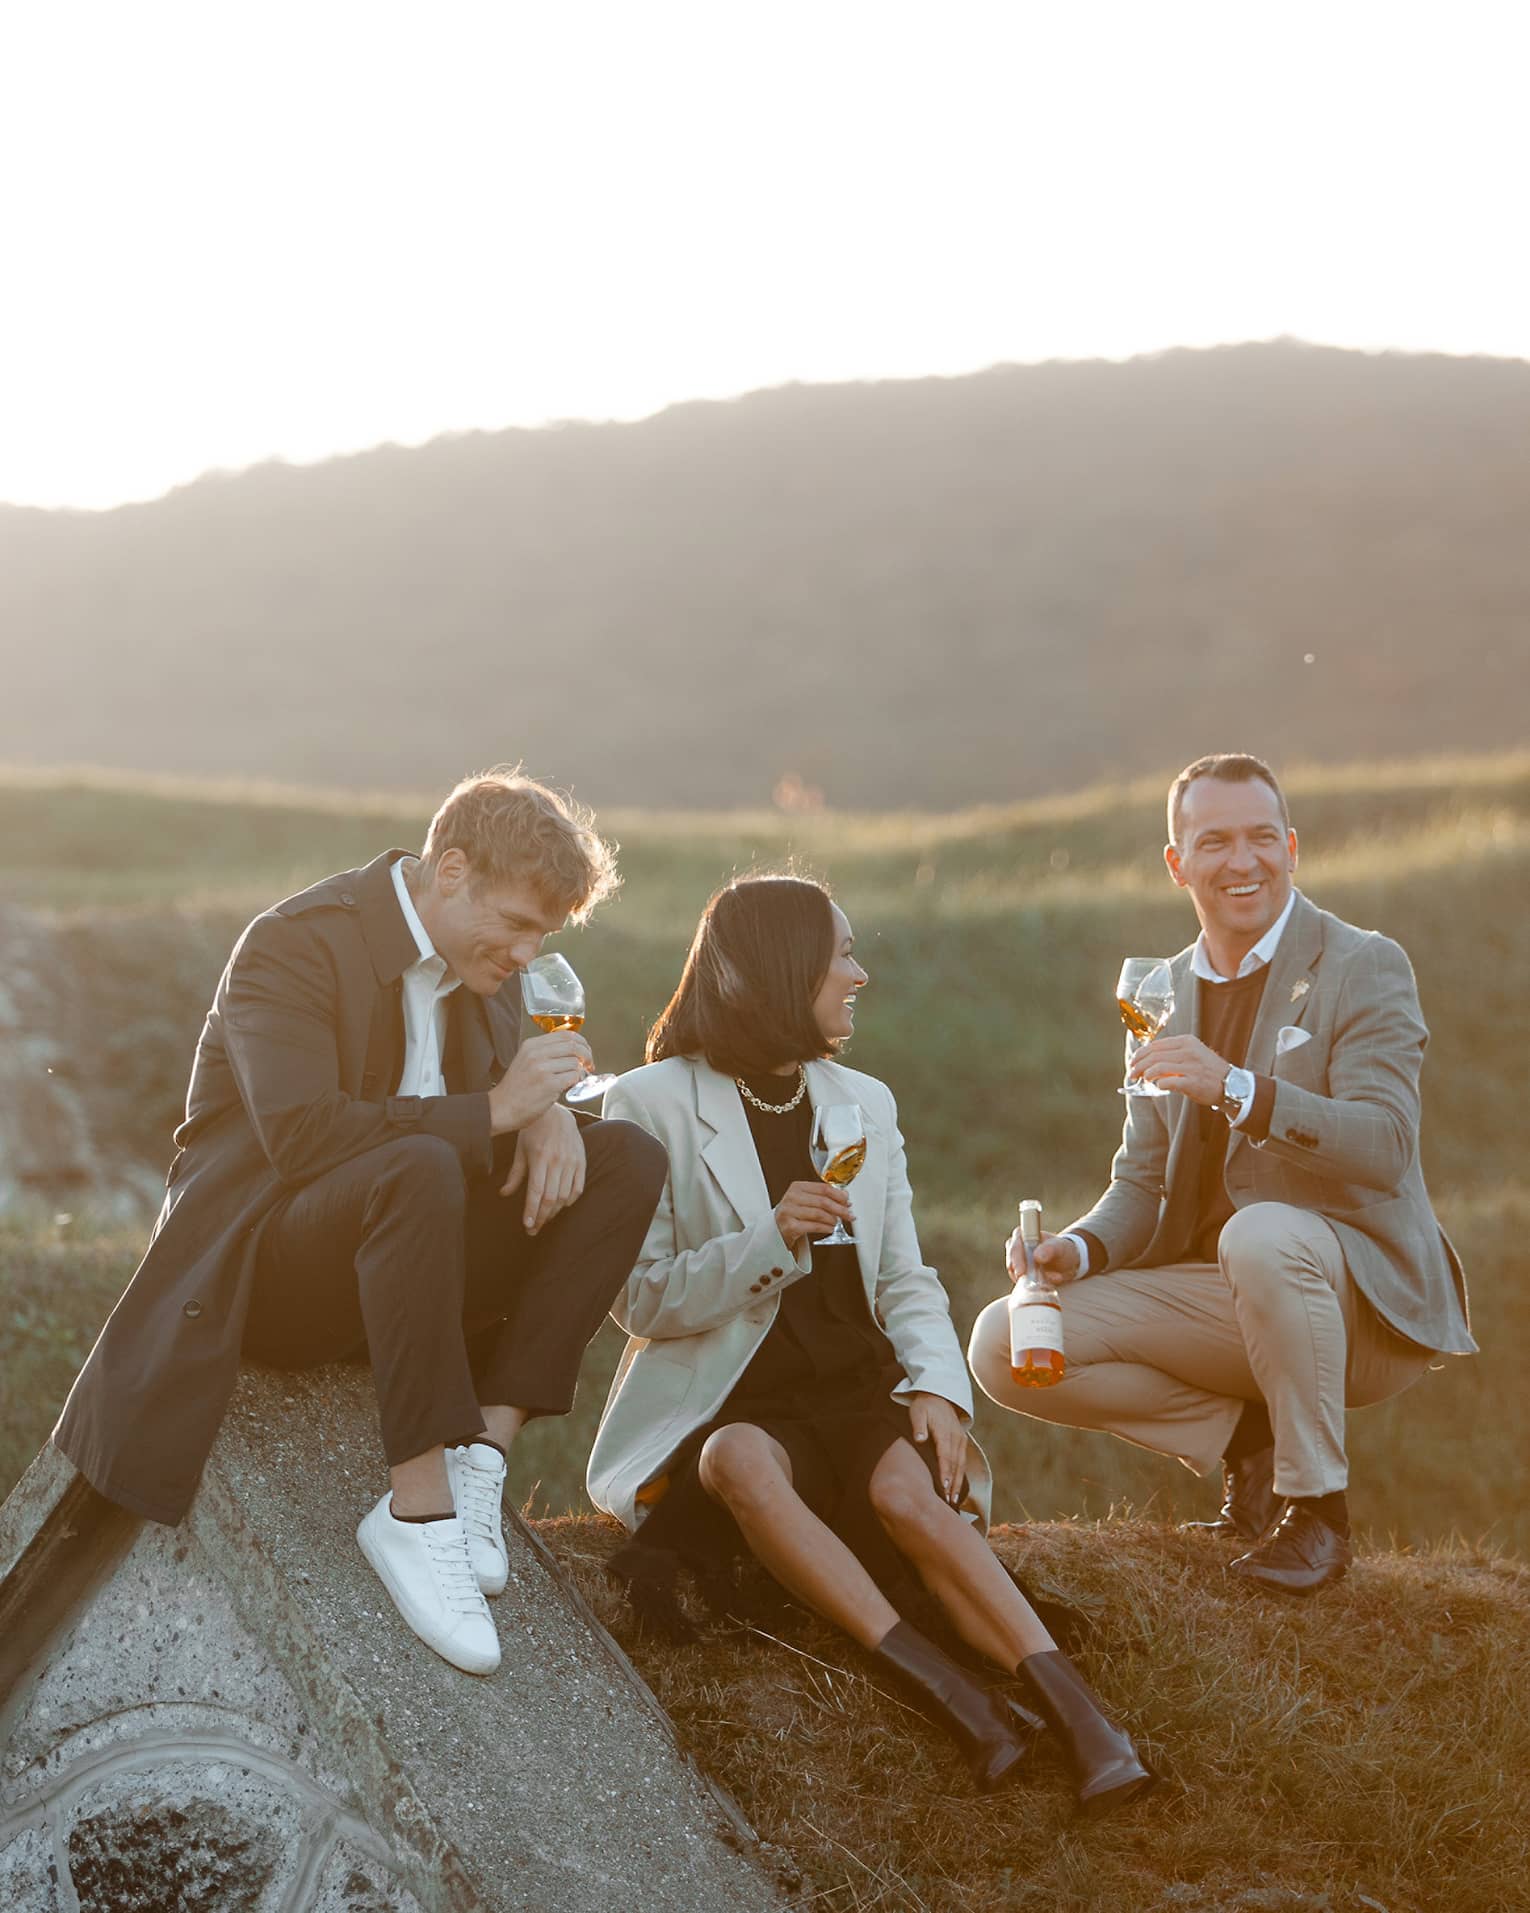 Three friends sitting on a hillside, smiling and drinking wine